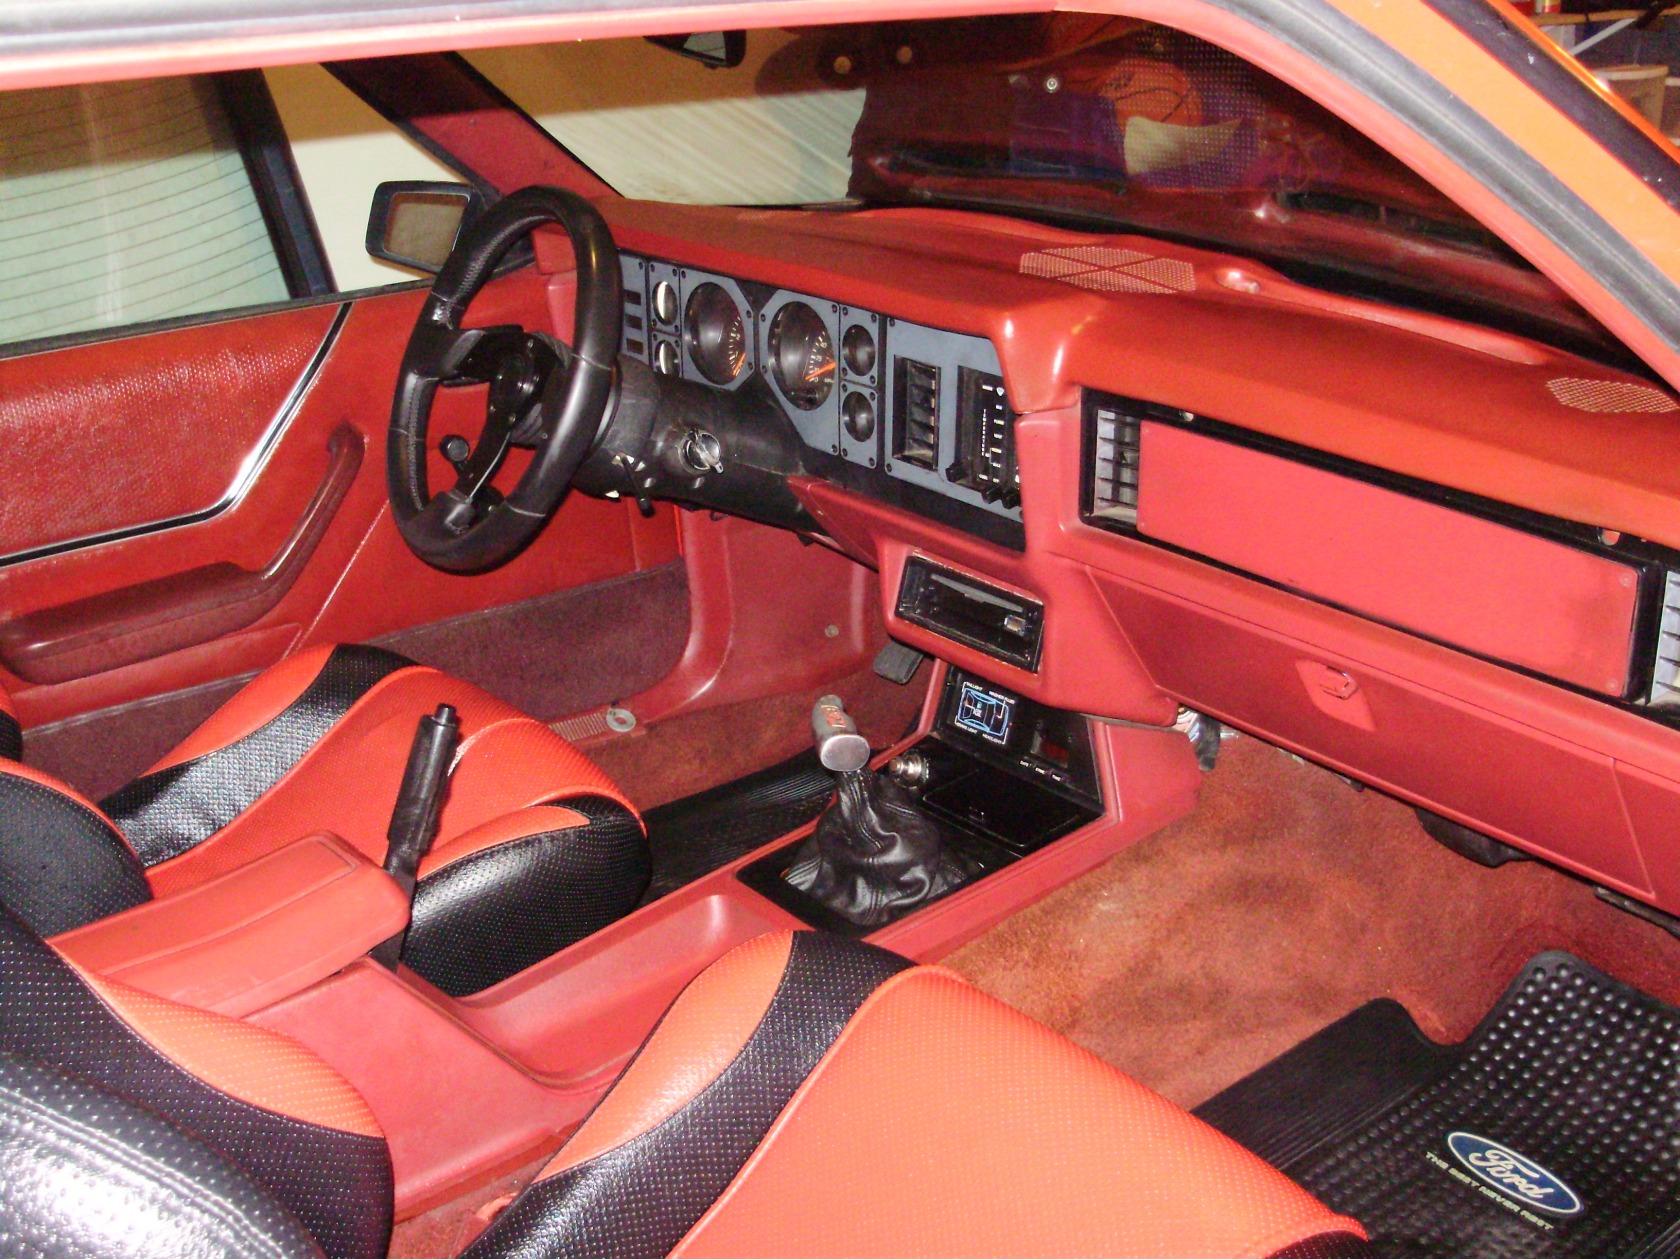 My 1986 Mustang Gt Ford Mustang Photo Gallery Shnack Com